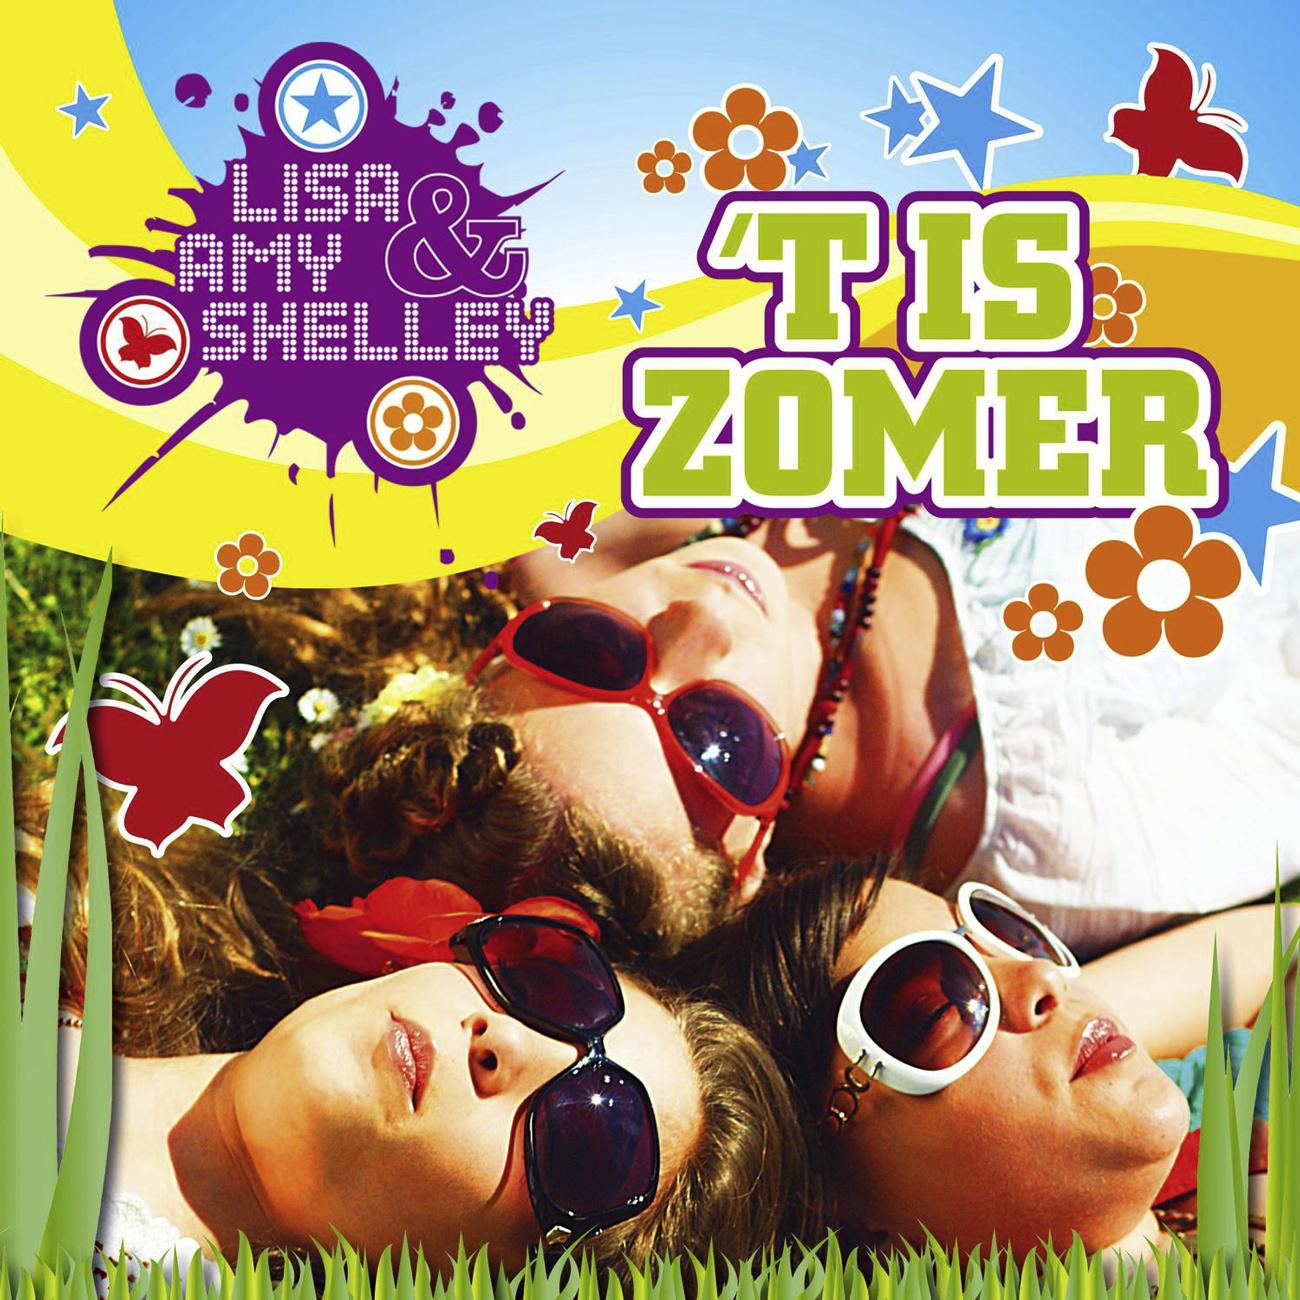 Lisa, Amy & Shelley - 't Is Zomer